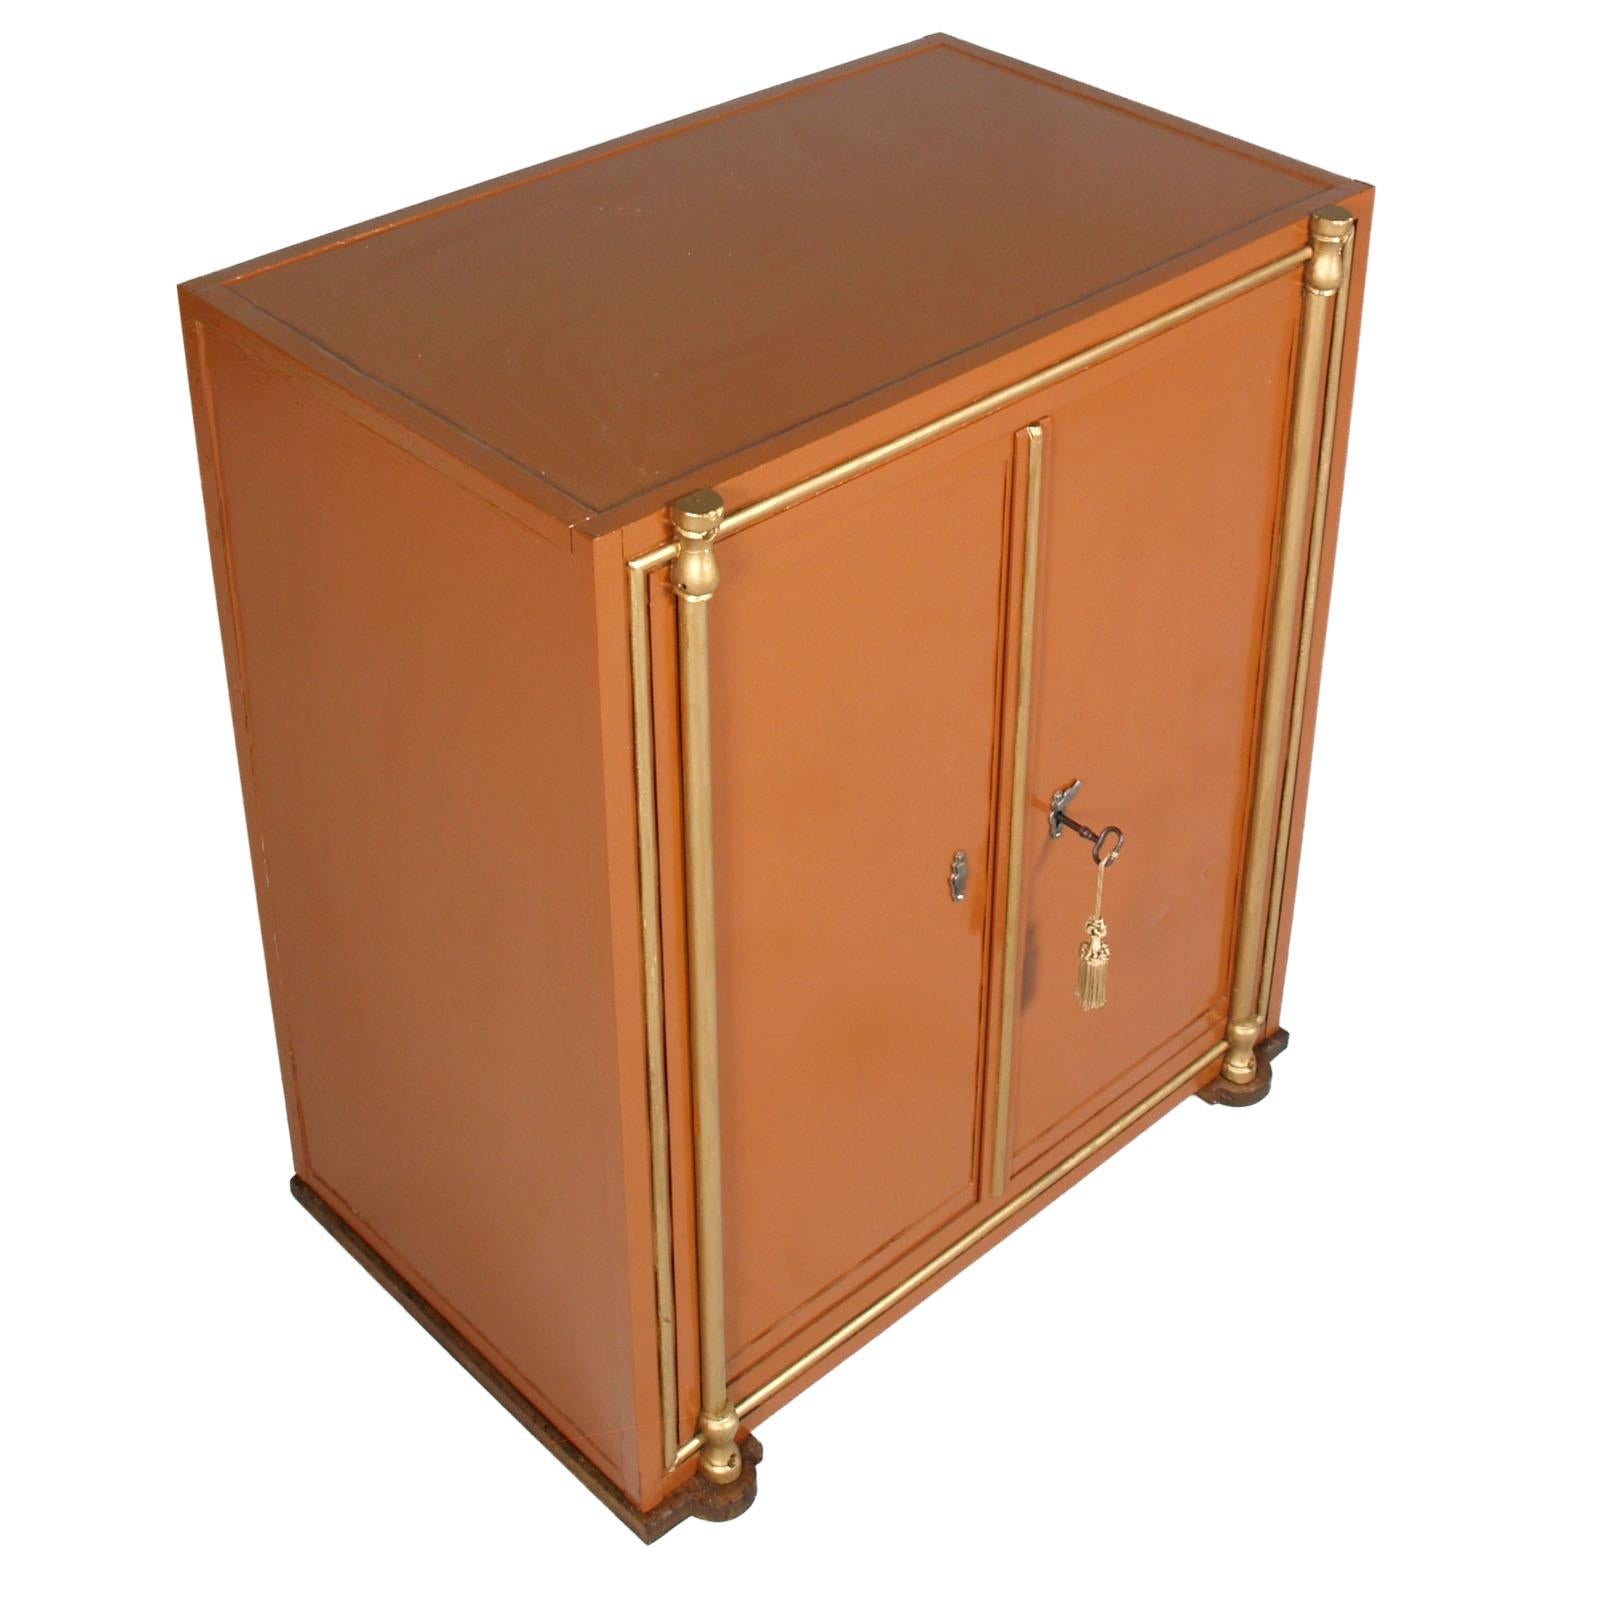 1969 Wien Armored cabinet, safe, restored and functioning, in solid oak the internal structure, covered with panels in welded steel.

Measures cm: H 100, W 90, D 56.